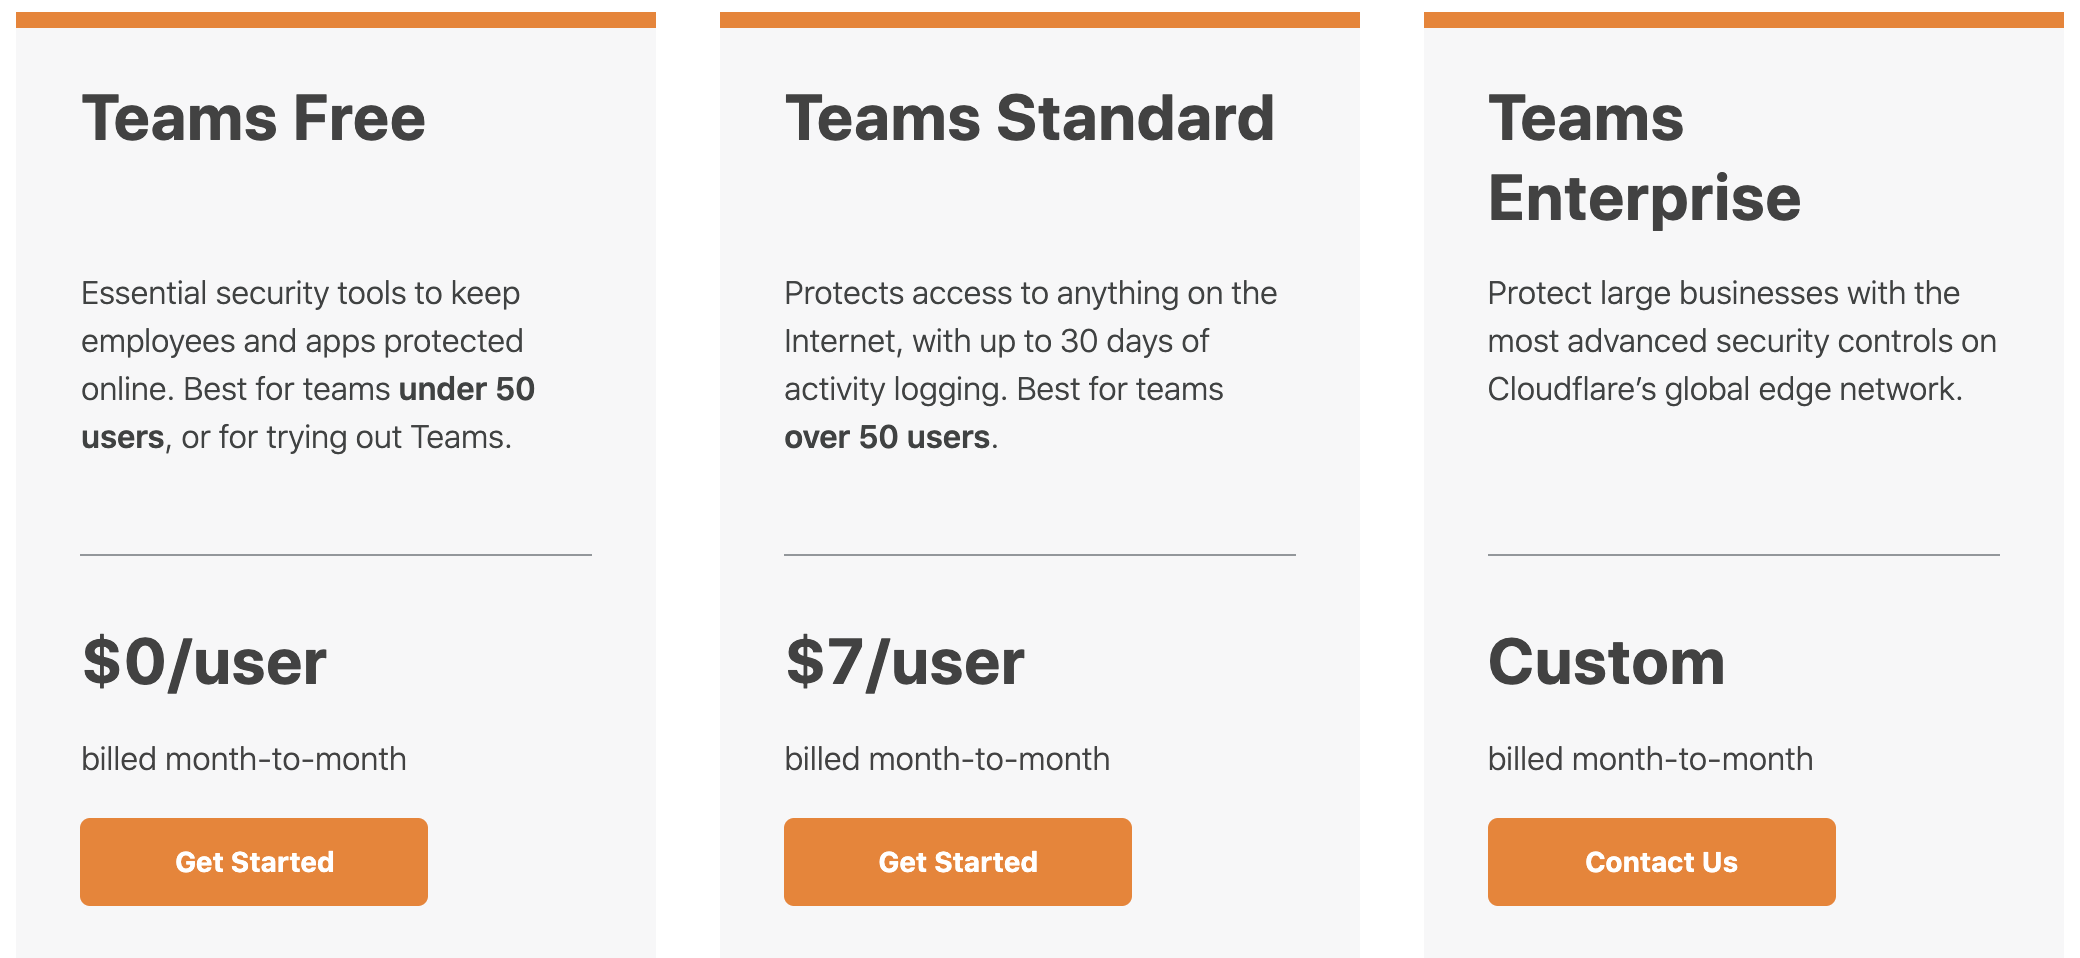 Overview of subscription plans for Cloudflare for Teams.